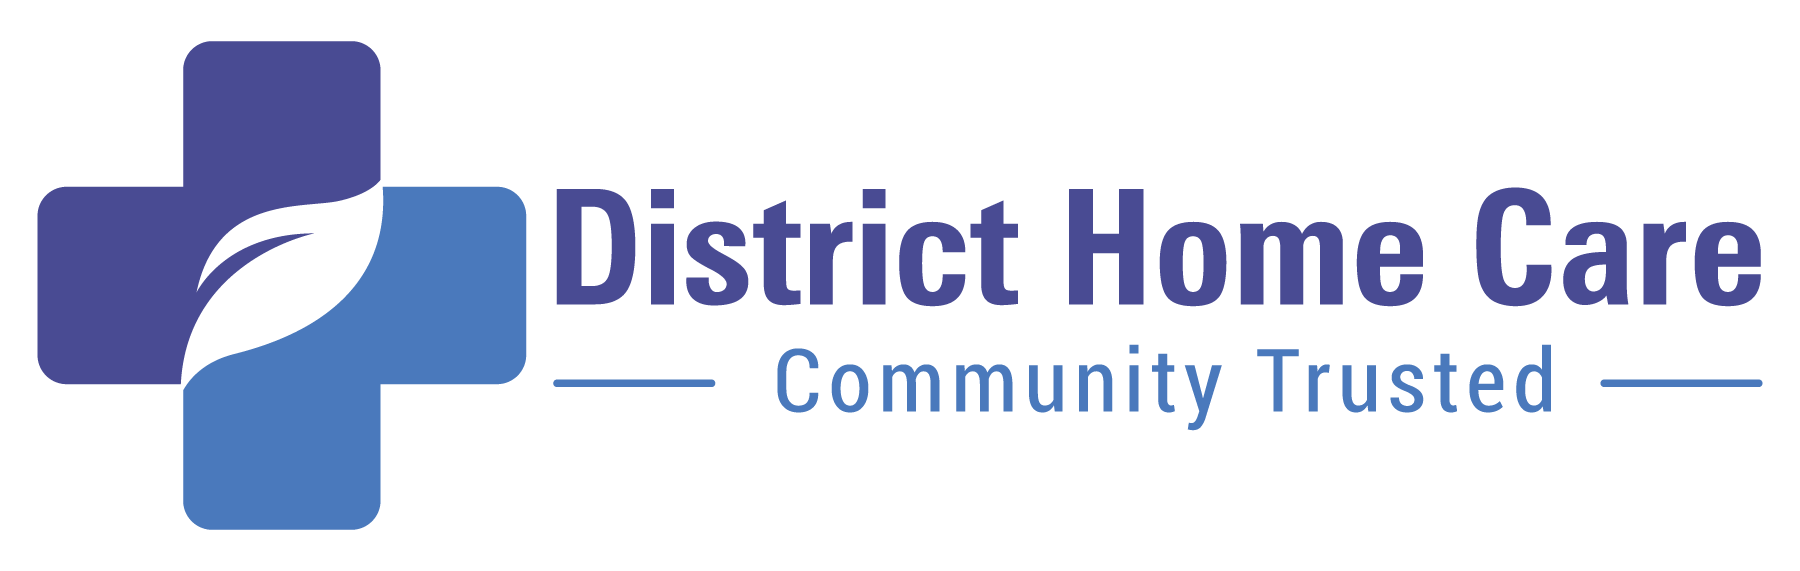 District Home Care